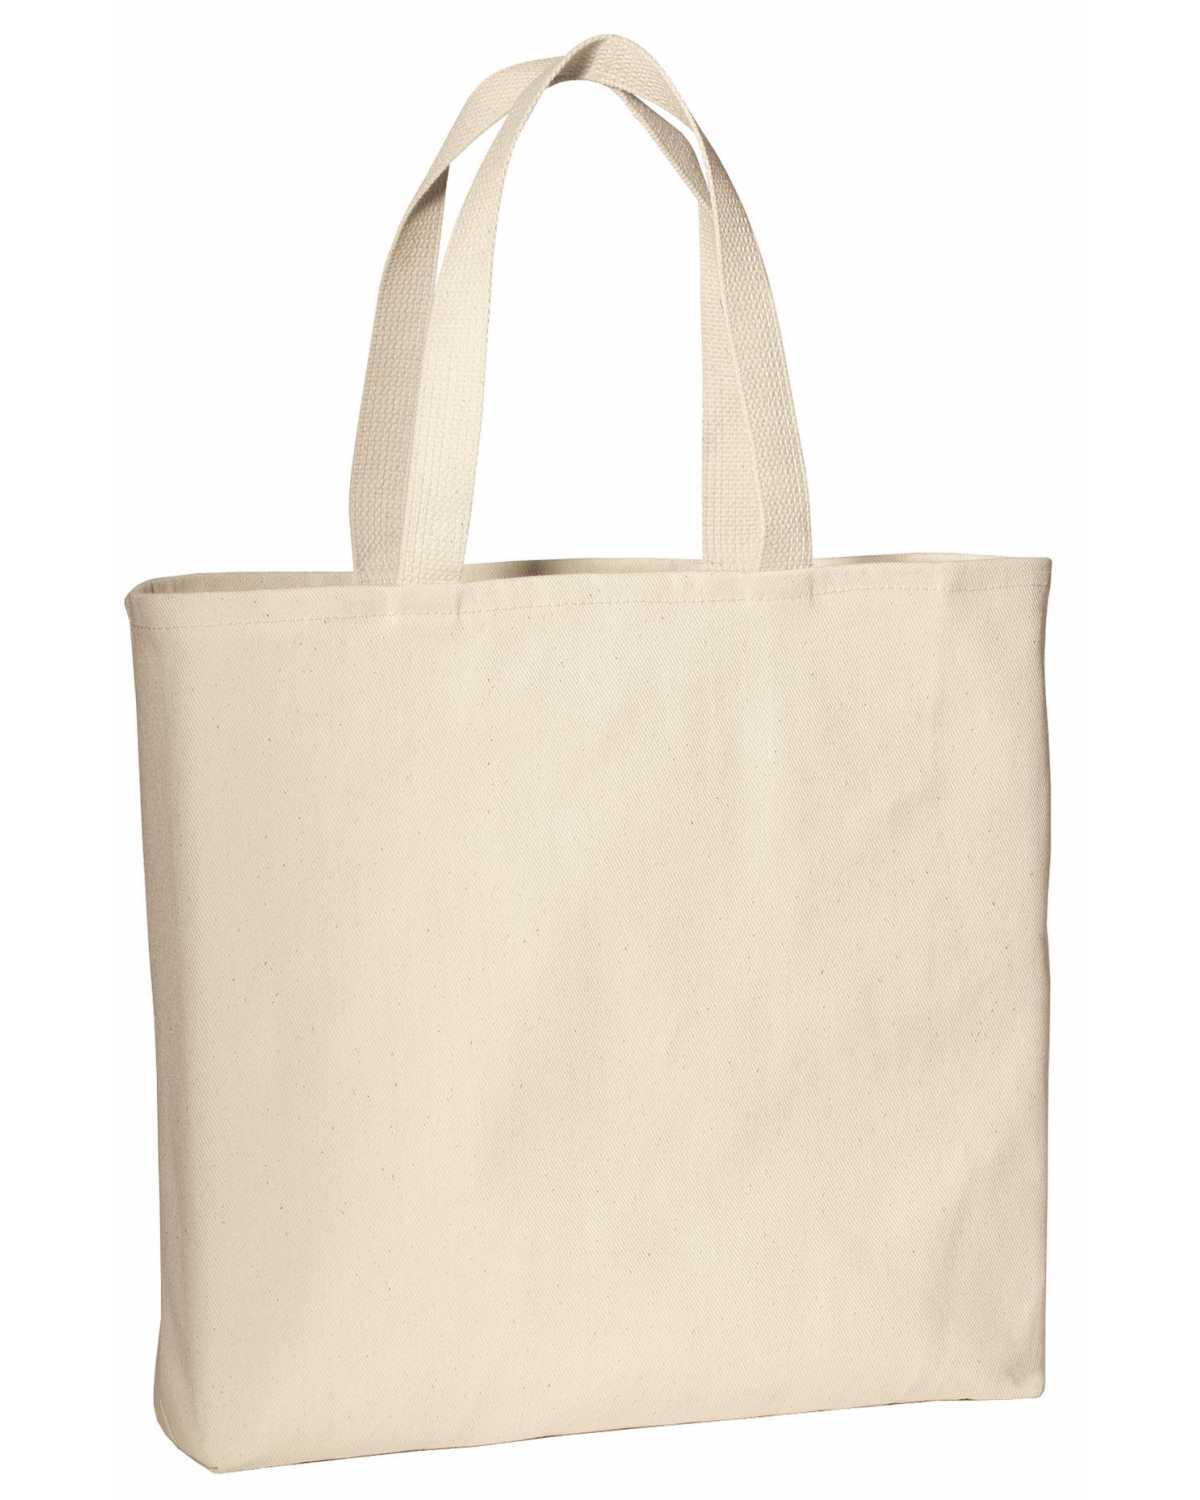 Port Authority B050 Convention Tote on discount | ApparelChoice.com